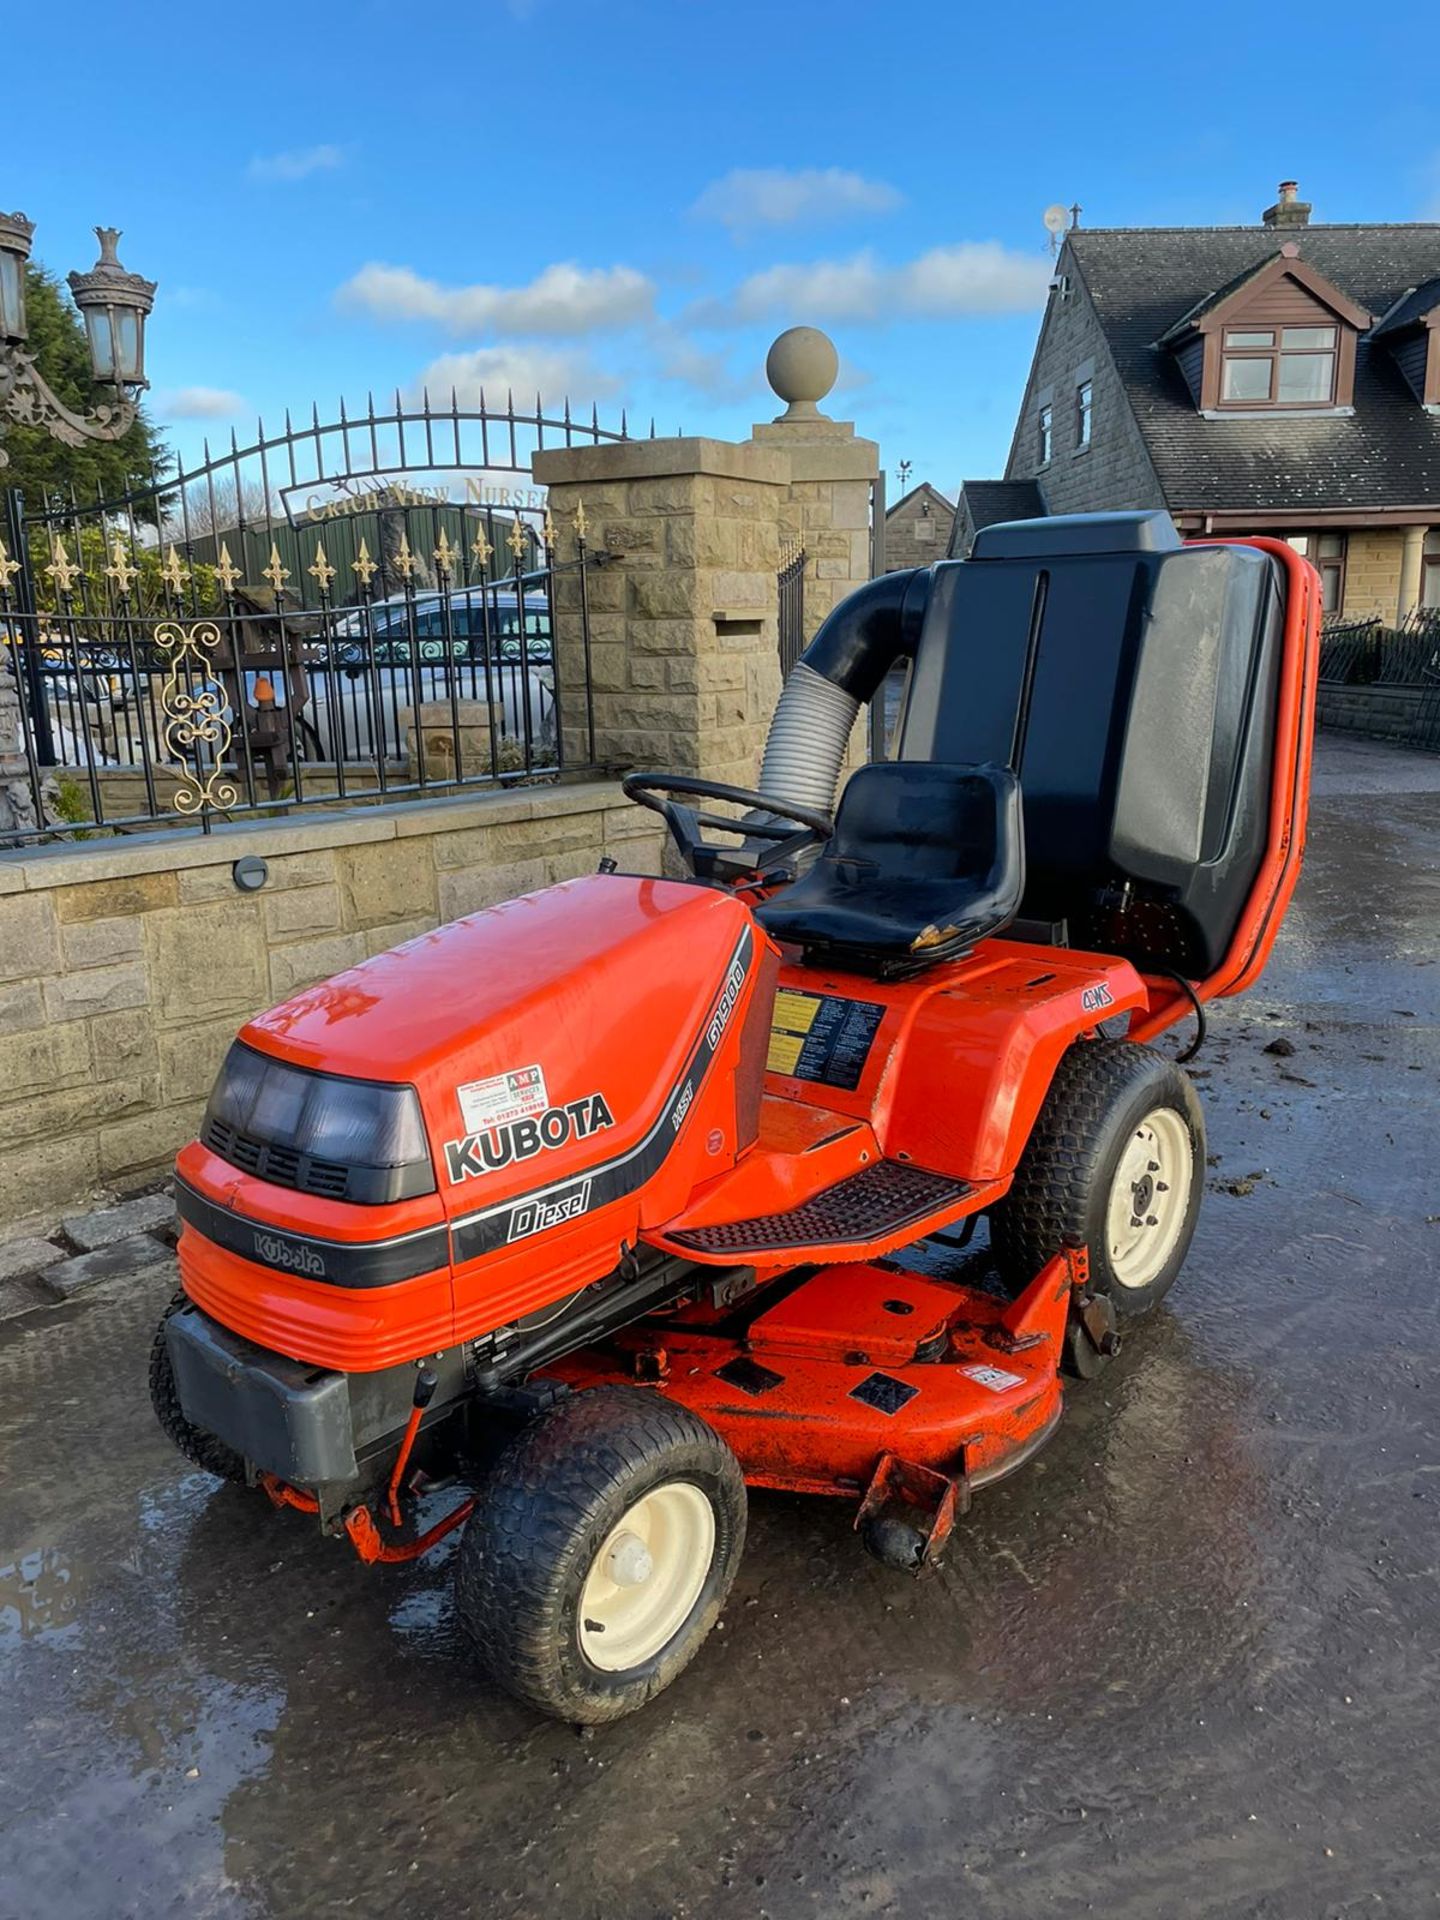 KUBOTA G1900 HST 4WS RIDE ON MOWER WITH COLLECTOR, RUNS, DRIVES AND CUTS, DIESEL ENGINE *NO VAT* - Image 3 of 7